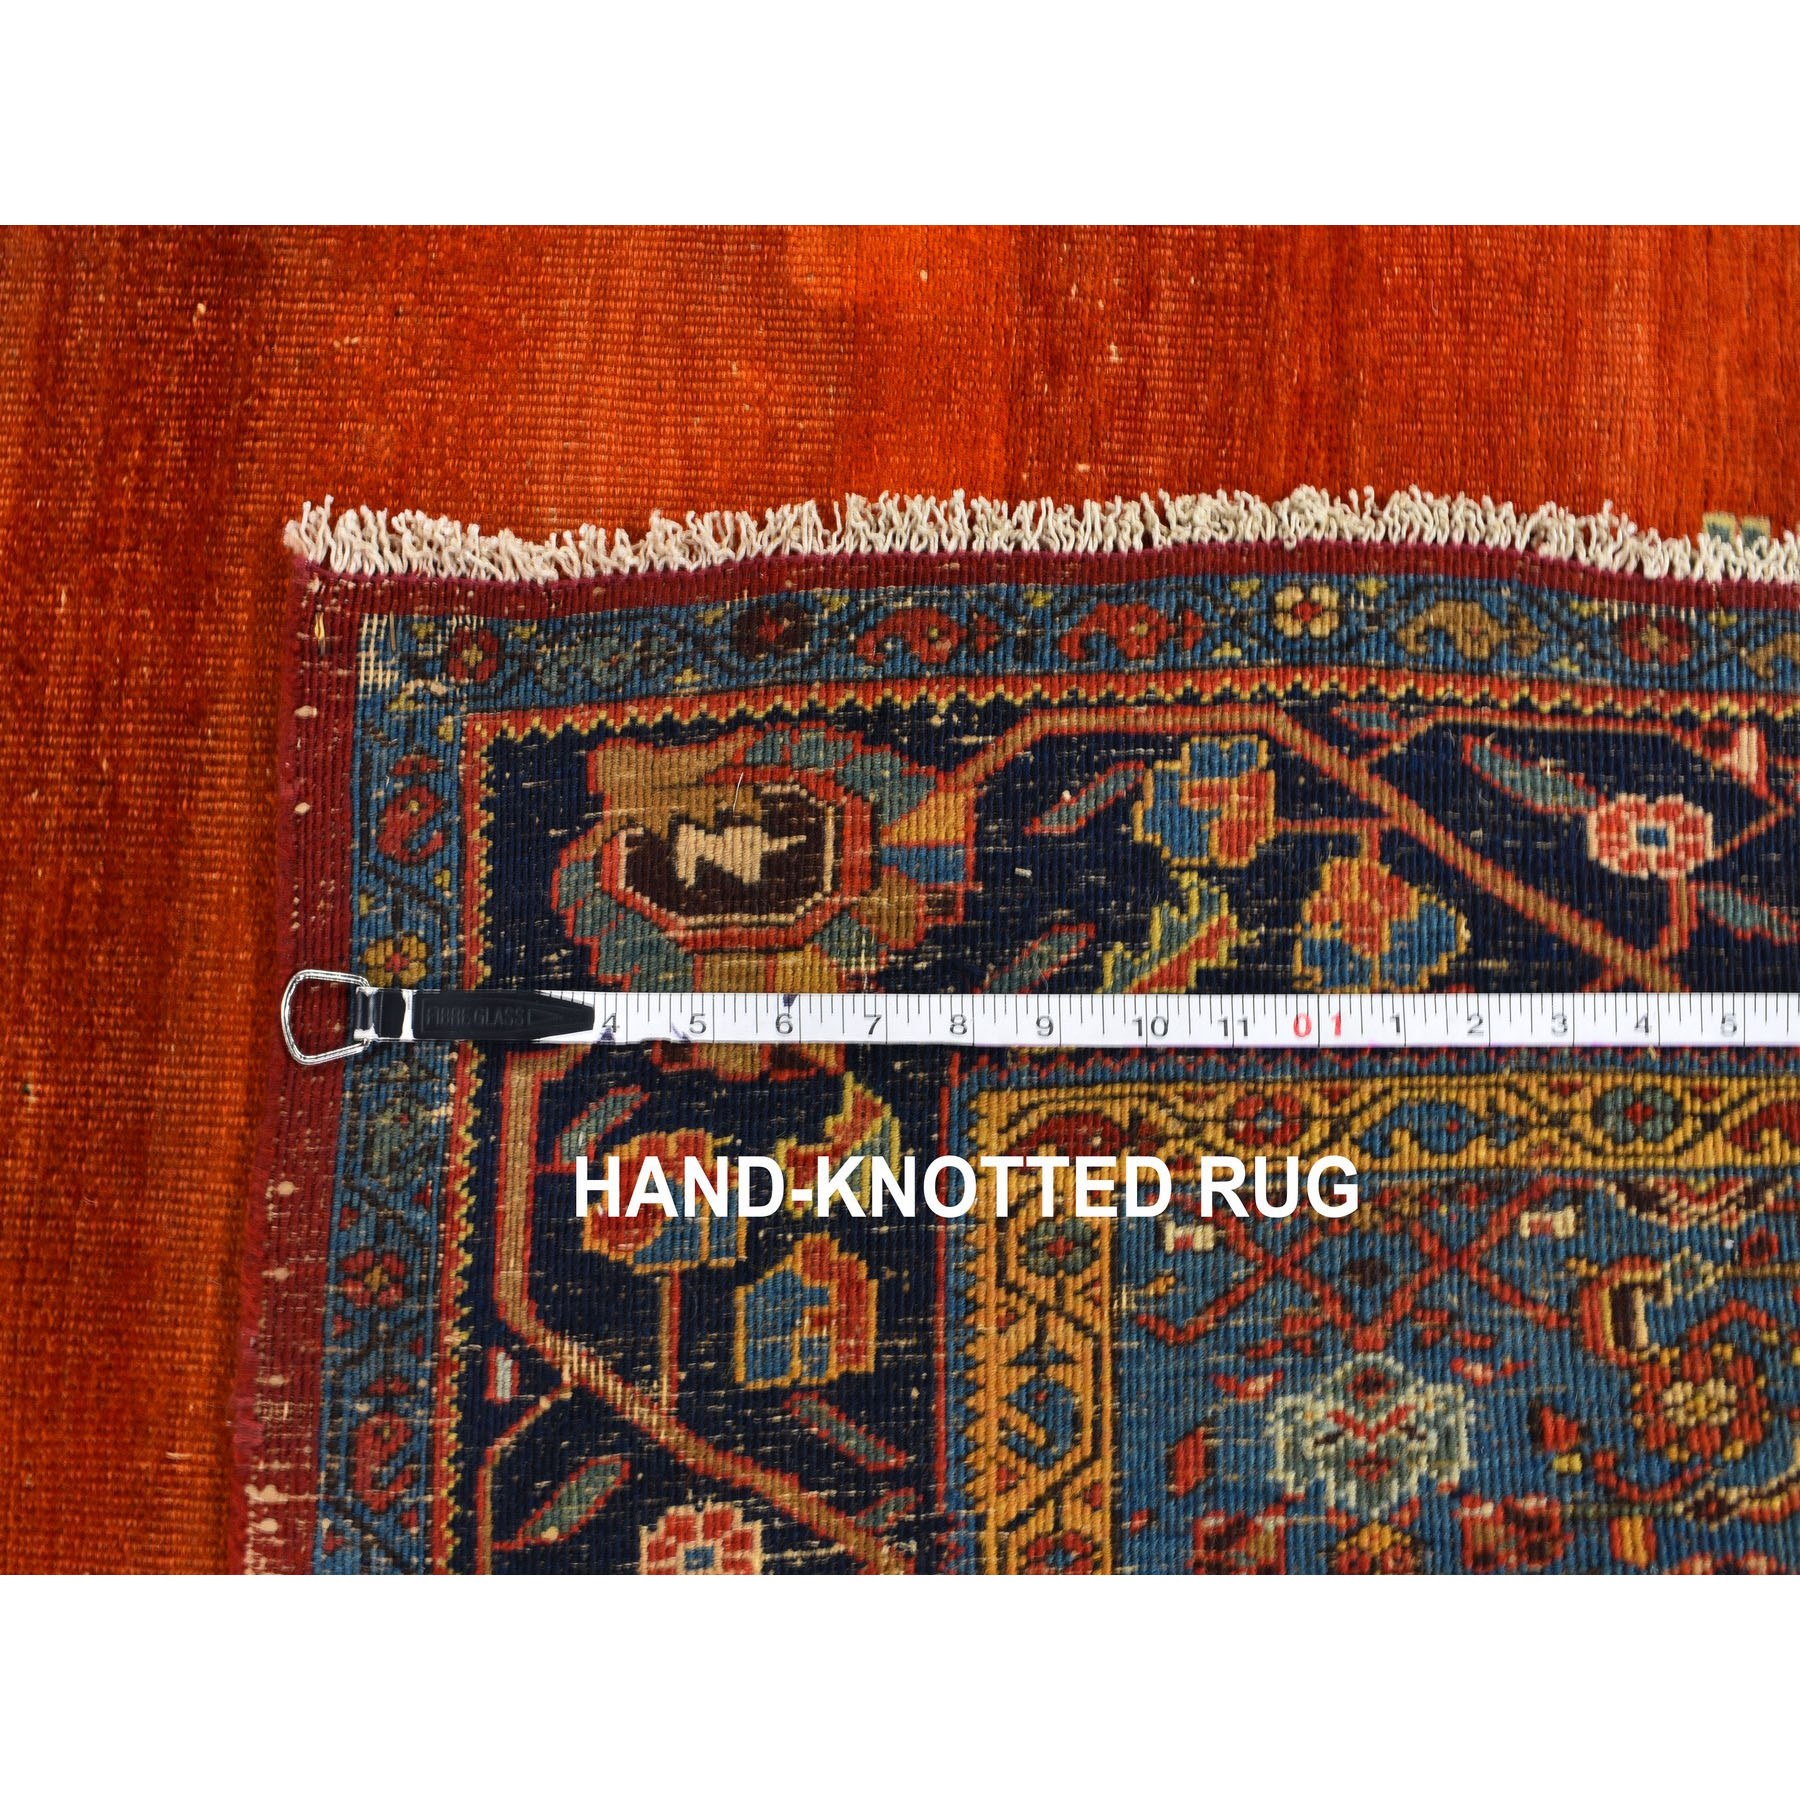 8-7 x10-7  Orange Antique And Worn Persian Afshar Open Filed With Medallion Hand Knotted Oriental Rug 